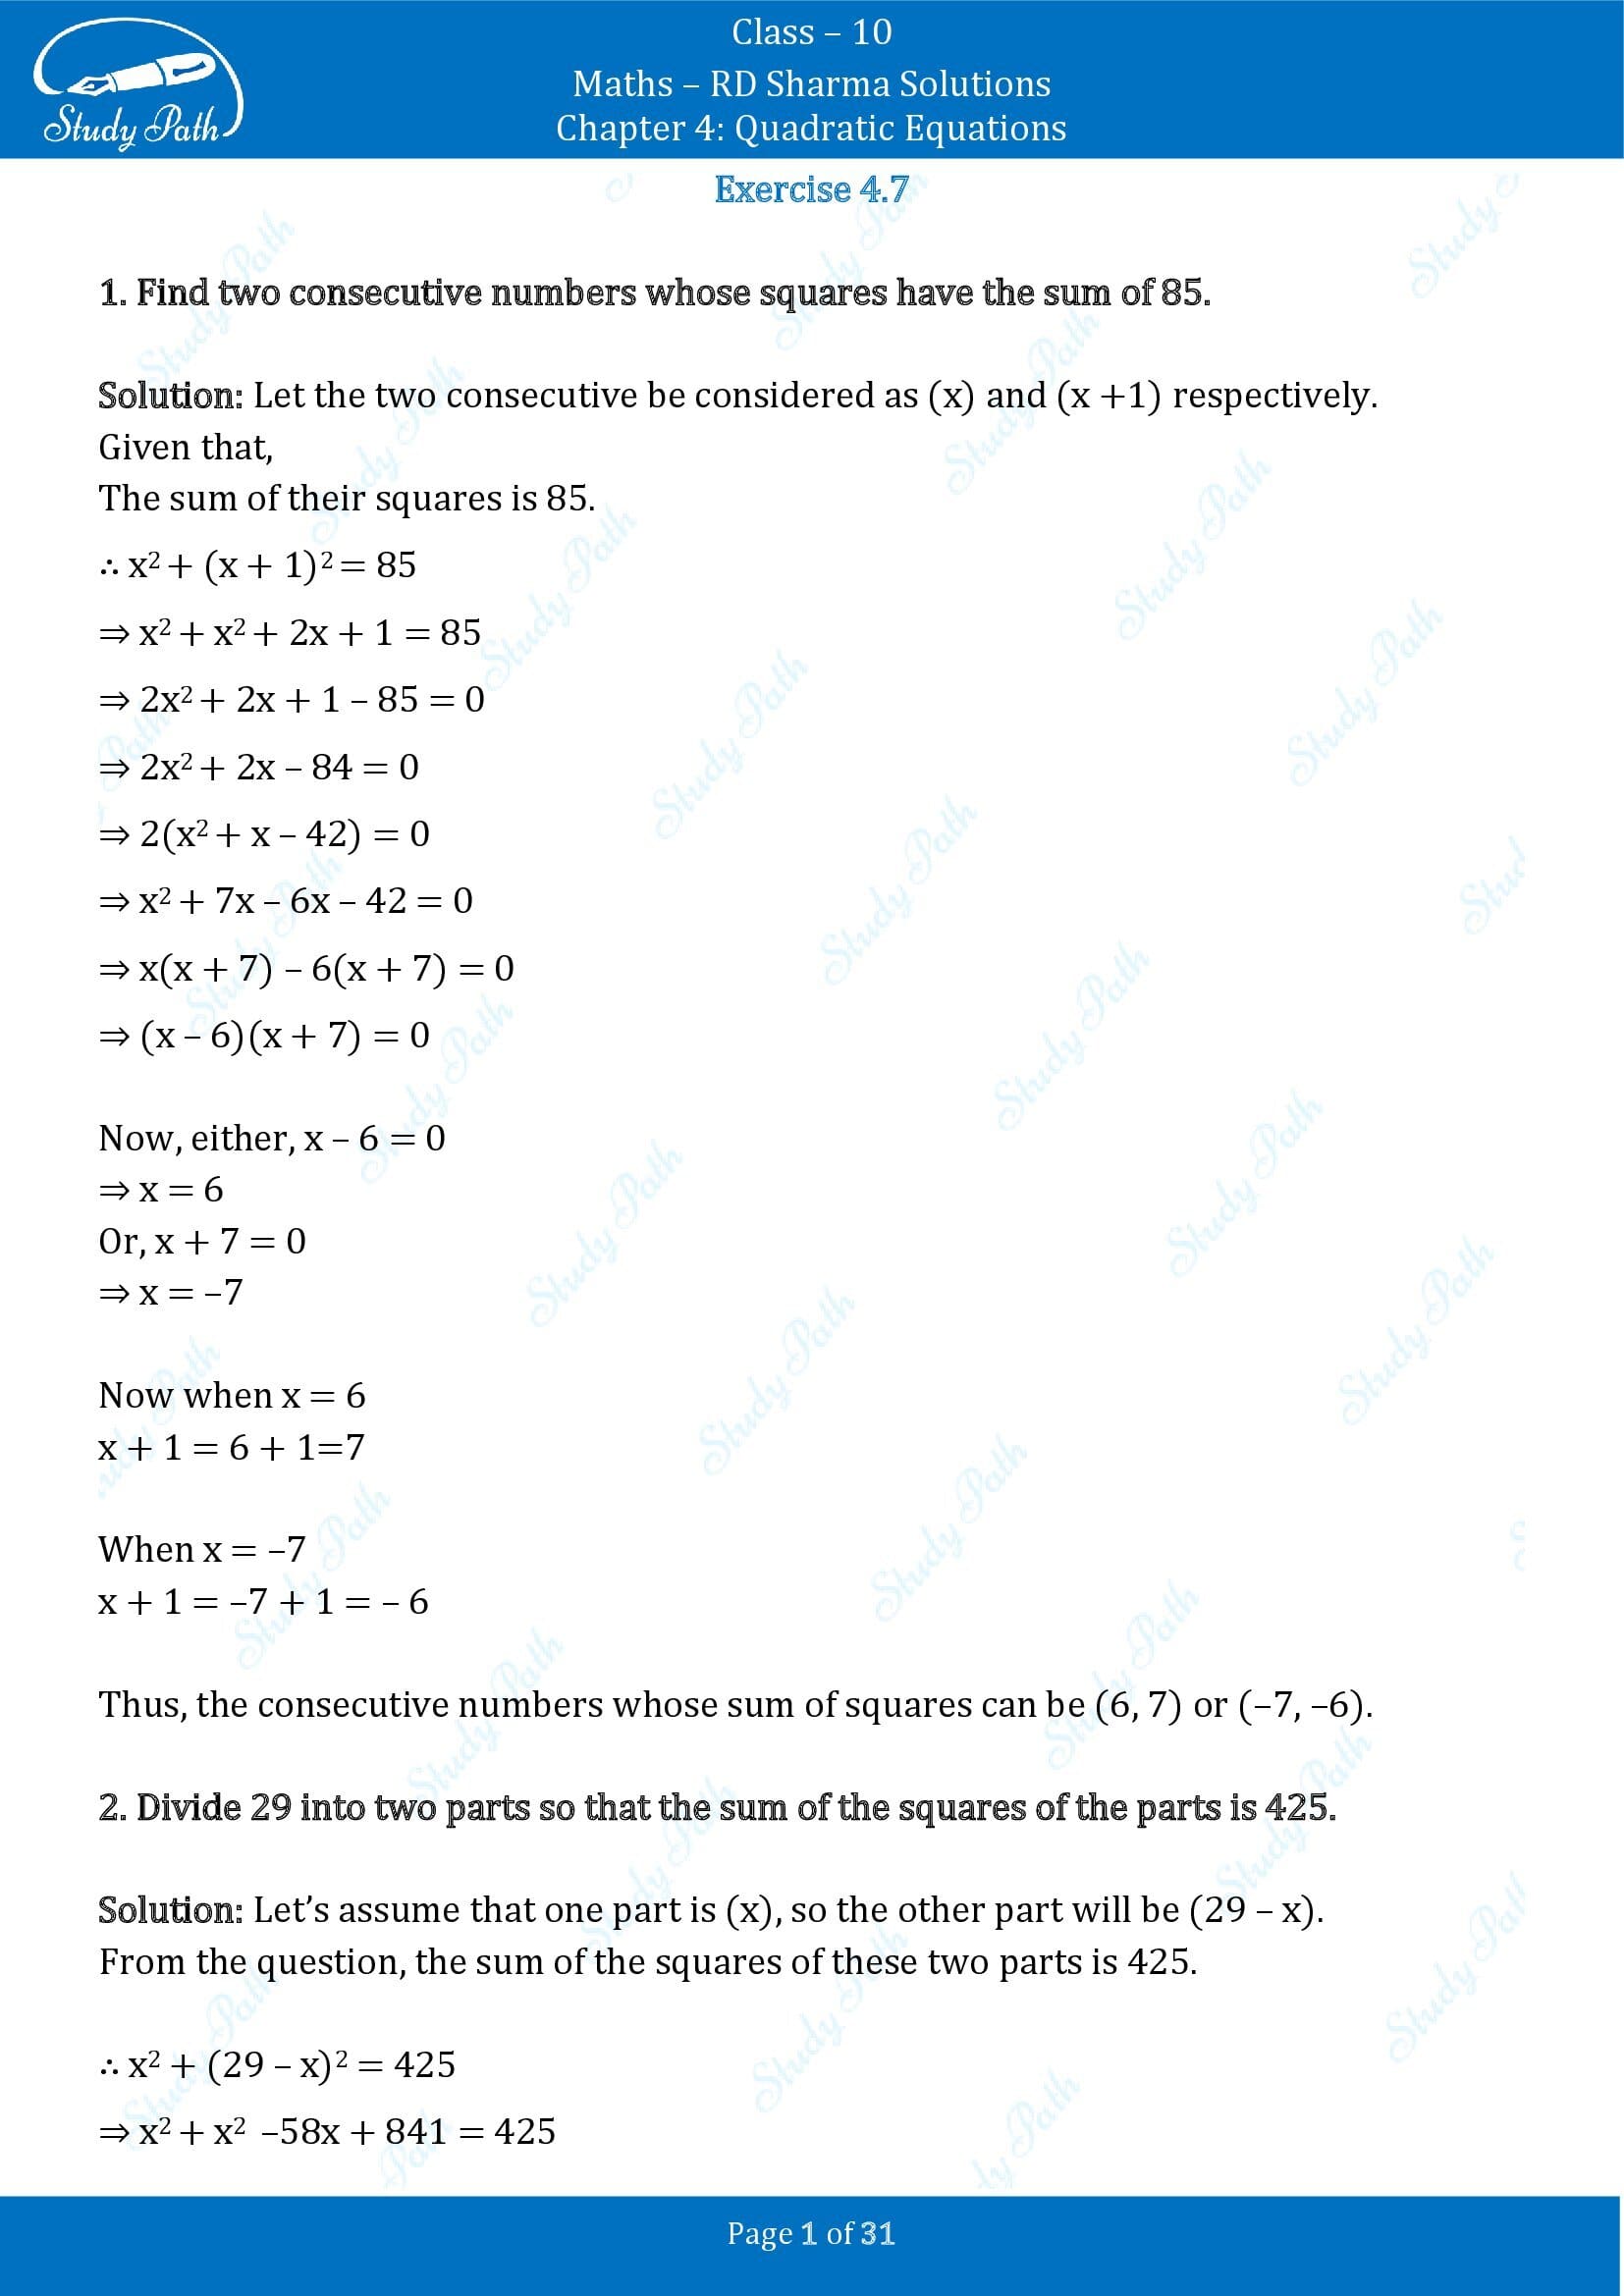 RD Sharma Solutions Class 10 Chapter 4 Quadratic Equations Exercise 4.7 00001